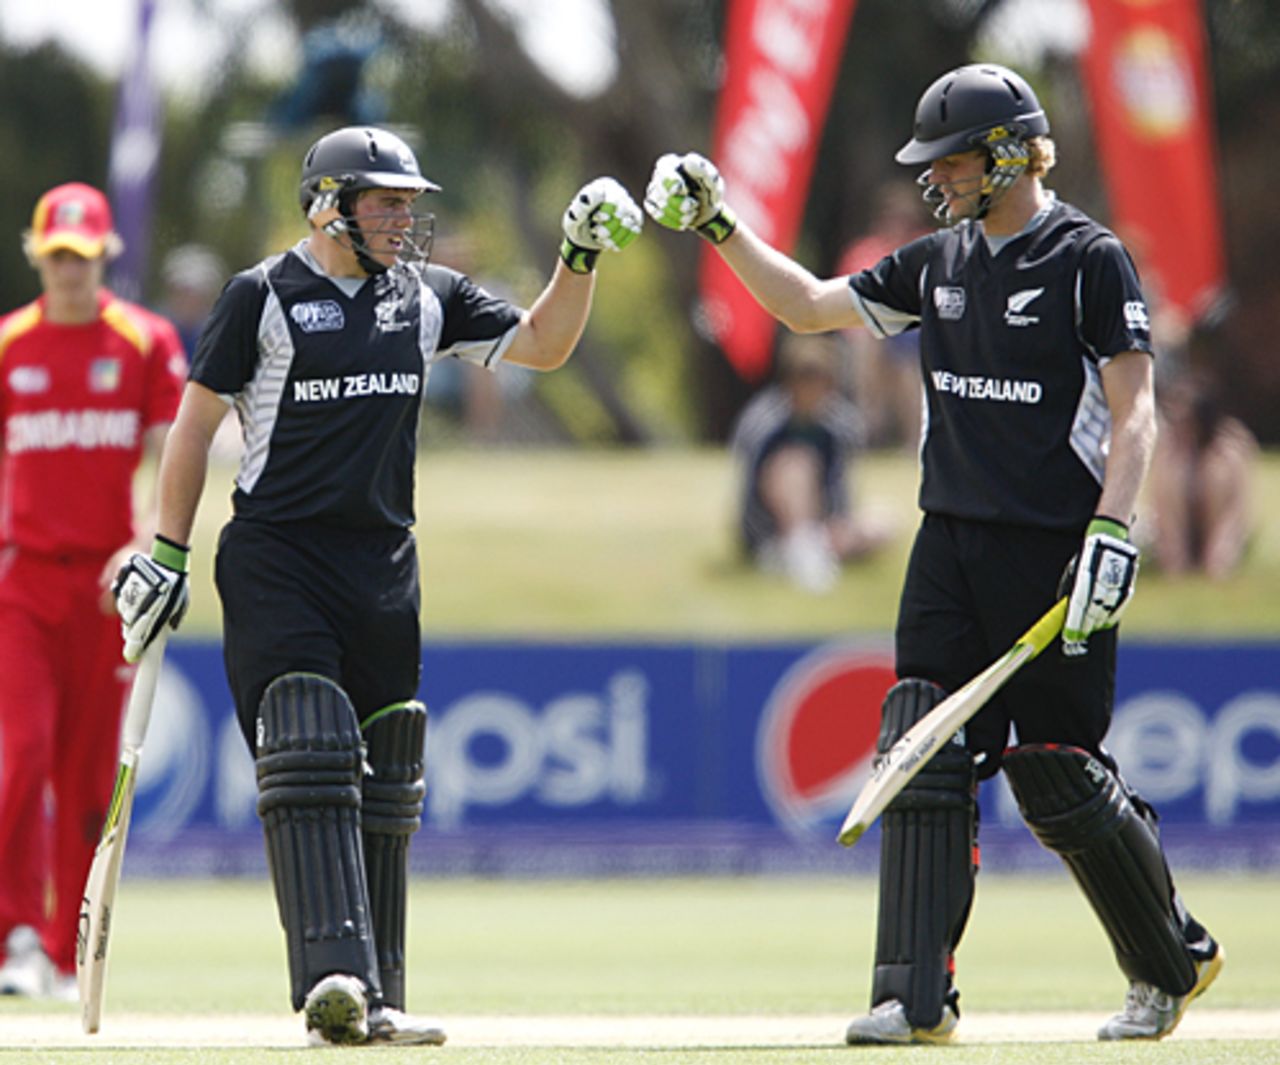 Tom Latham and Harry Boam added a century stand, New Zealand Under-19s v Zimbabwe Under-19s, 19th Match, Group C, ICC Under-19 World Cup, Lincoln, January 19, 2010